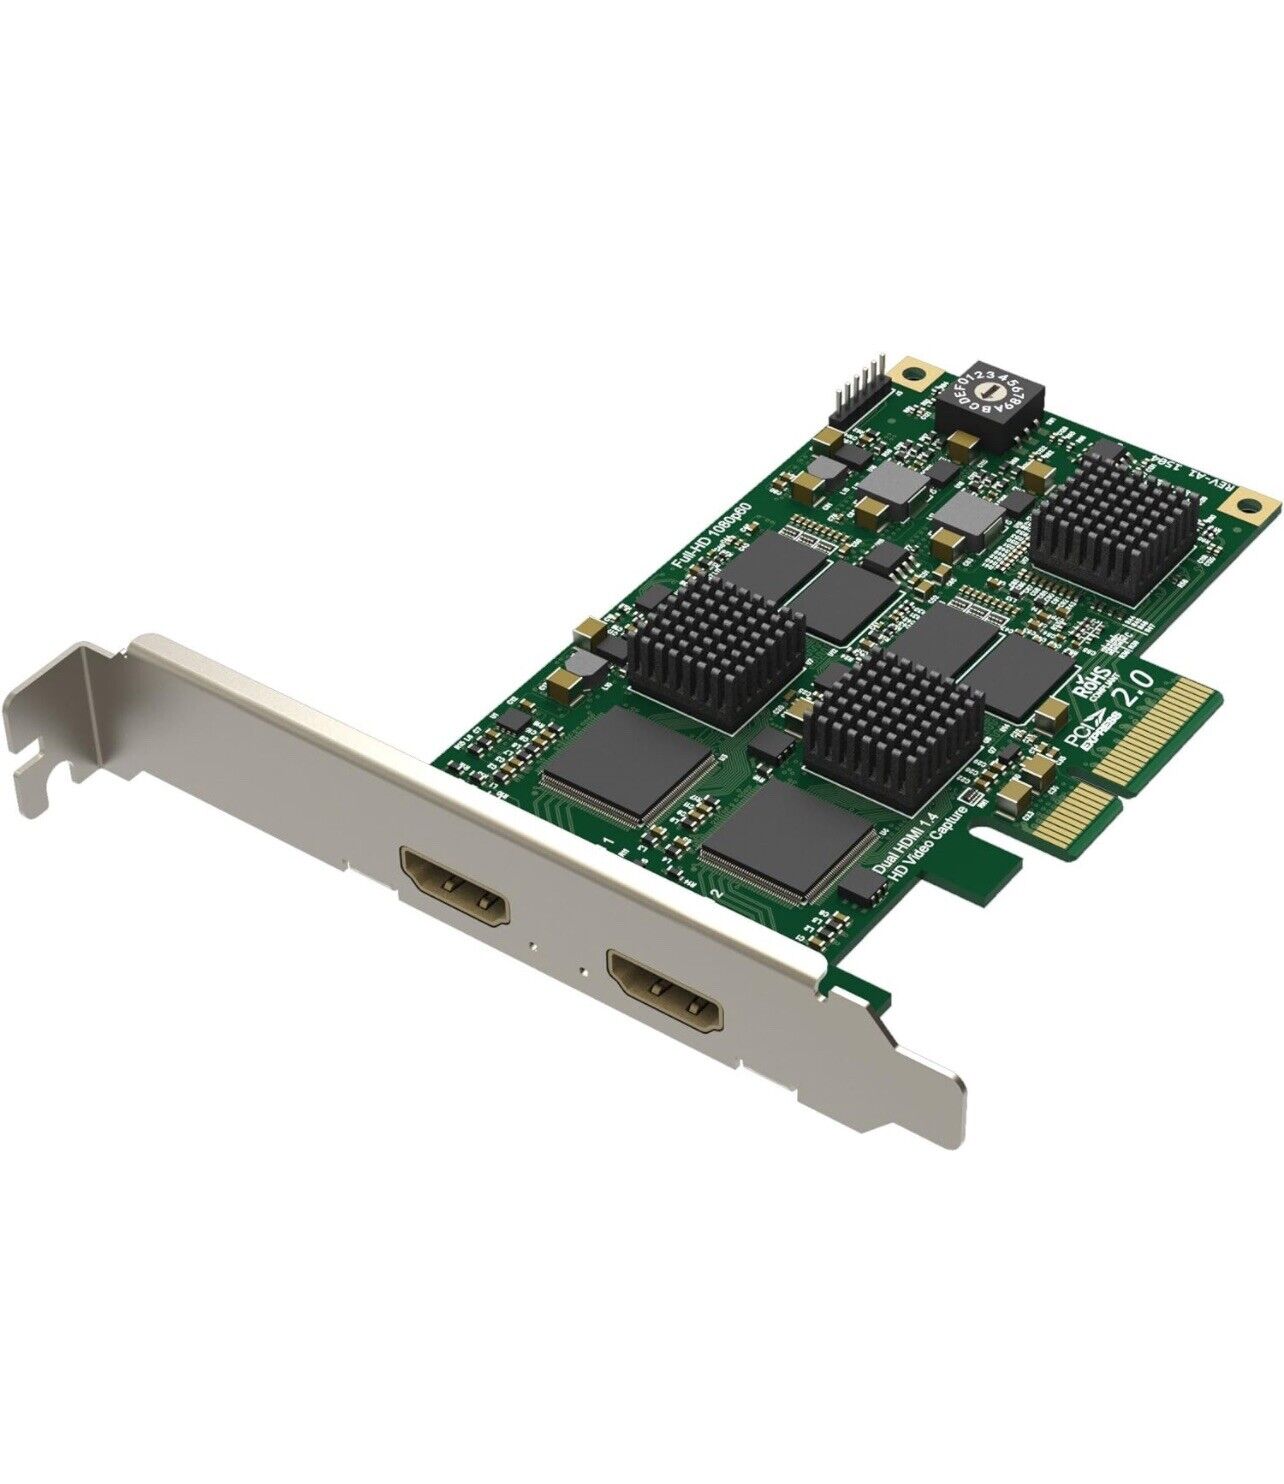 Magewell Pro Capture Dual HDMI 1080p 60fps Card Model 11080 PCIe 2.0